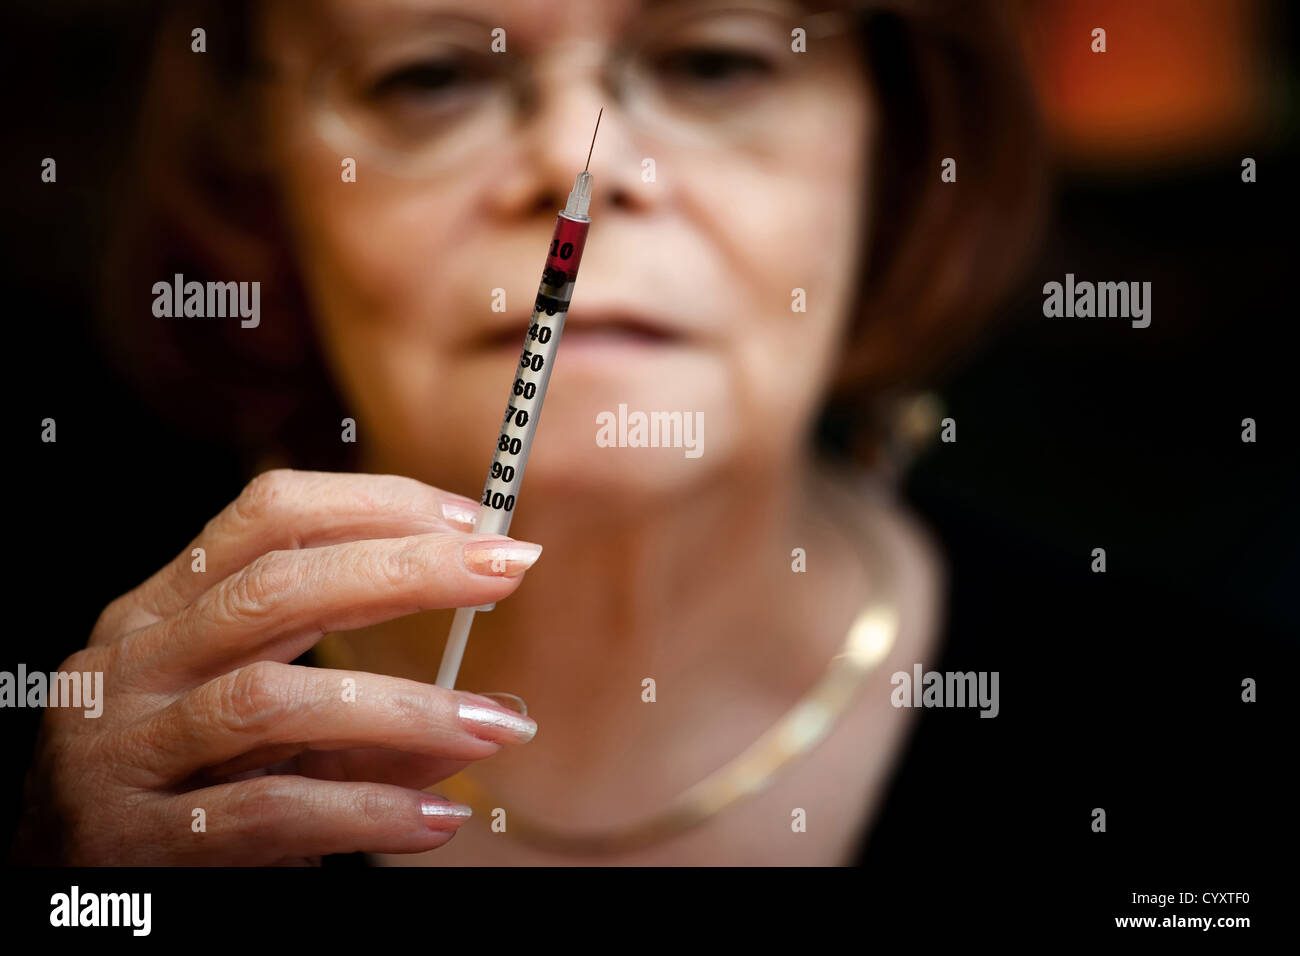 Senior woman looking at small hypodermic needle Stock Photo